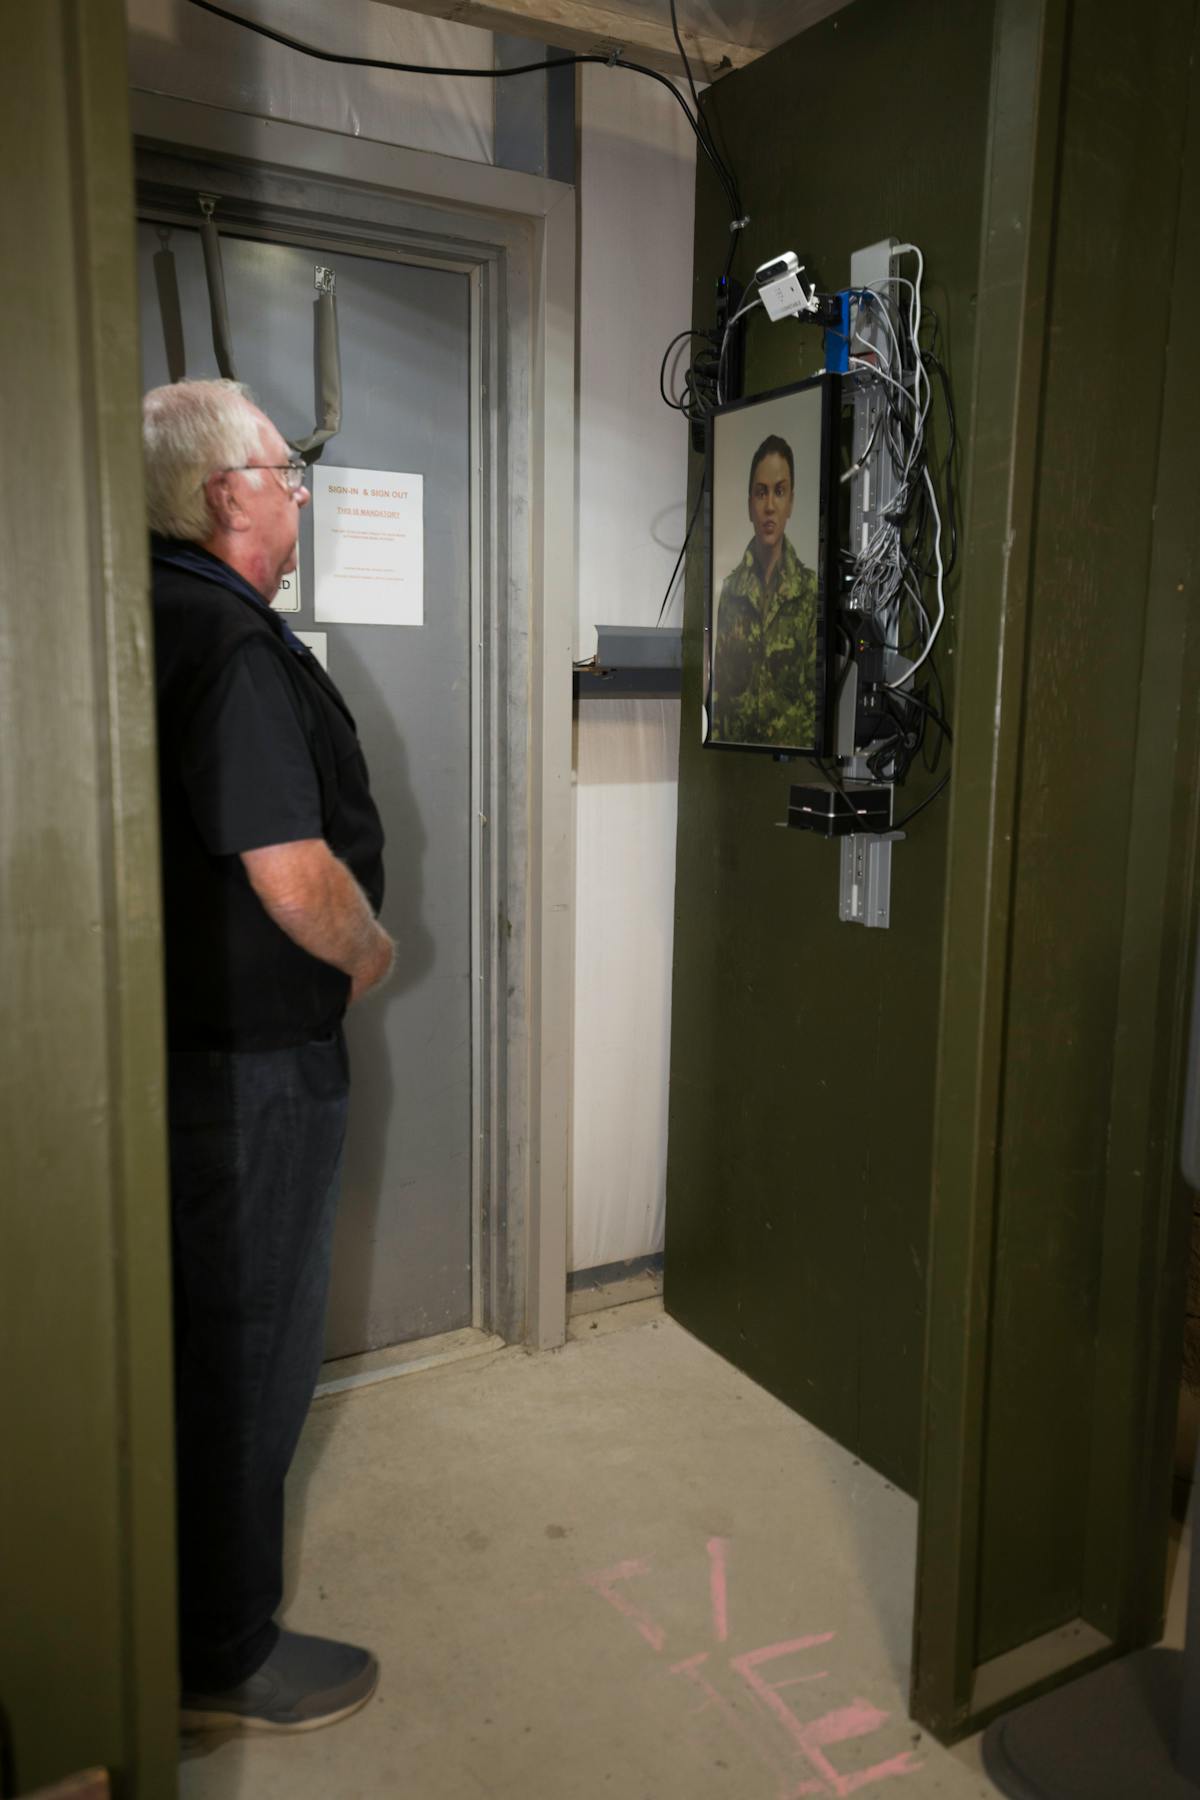 Figure 2: A volunteer from the Ontario Regiment Museum stands in a vestibule for COVID-19 screening questions delivered by the Master Cpl. Lana AI assistant, followed by a temperature check with a FLIR thermal imaging module.